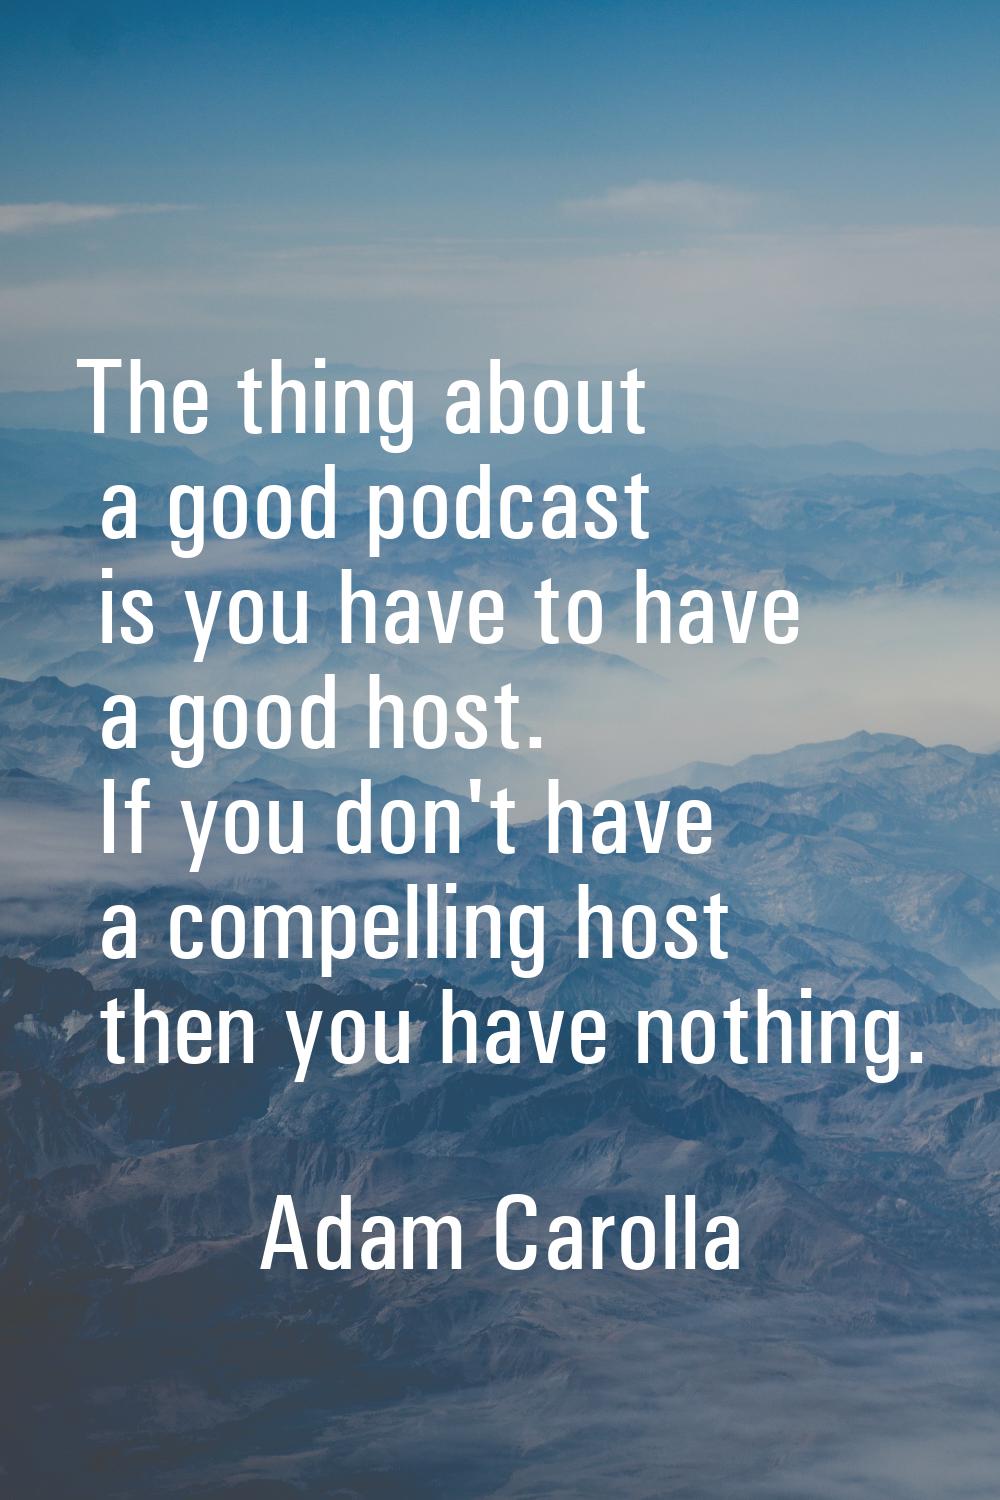 The thing about a good podcast is you have to have a good host. If you don't have a compelling host